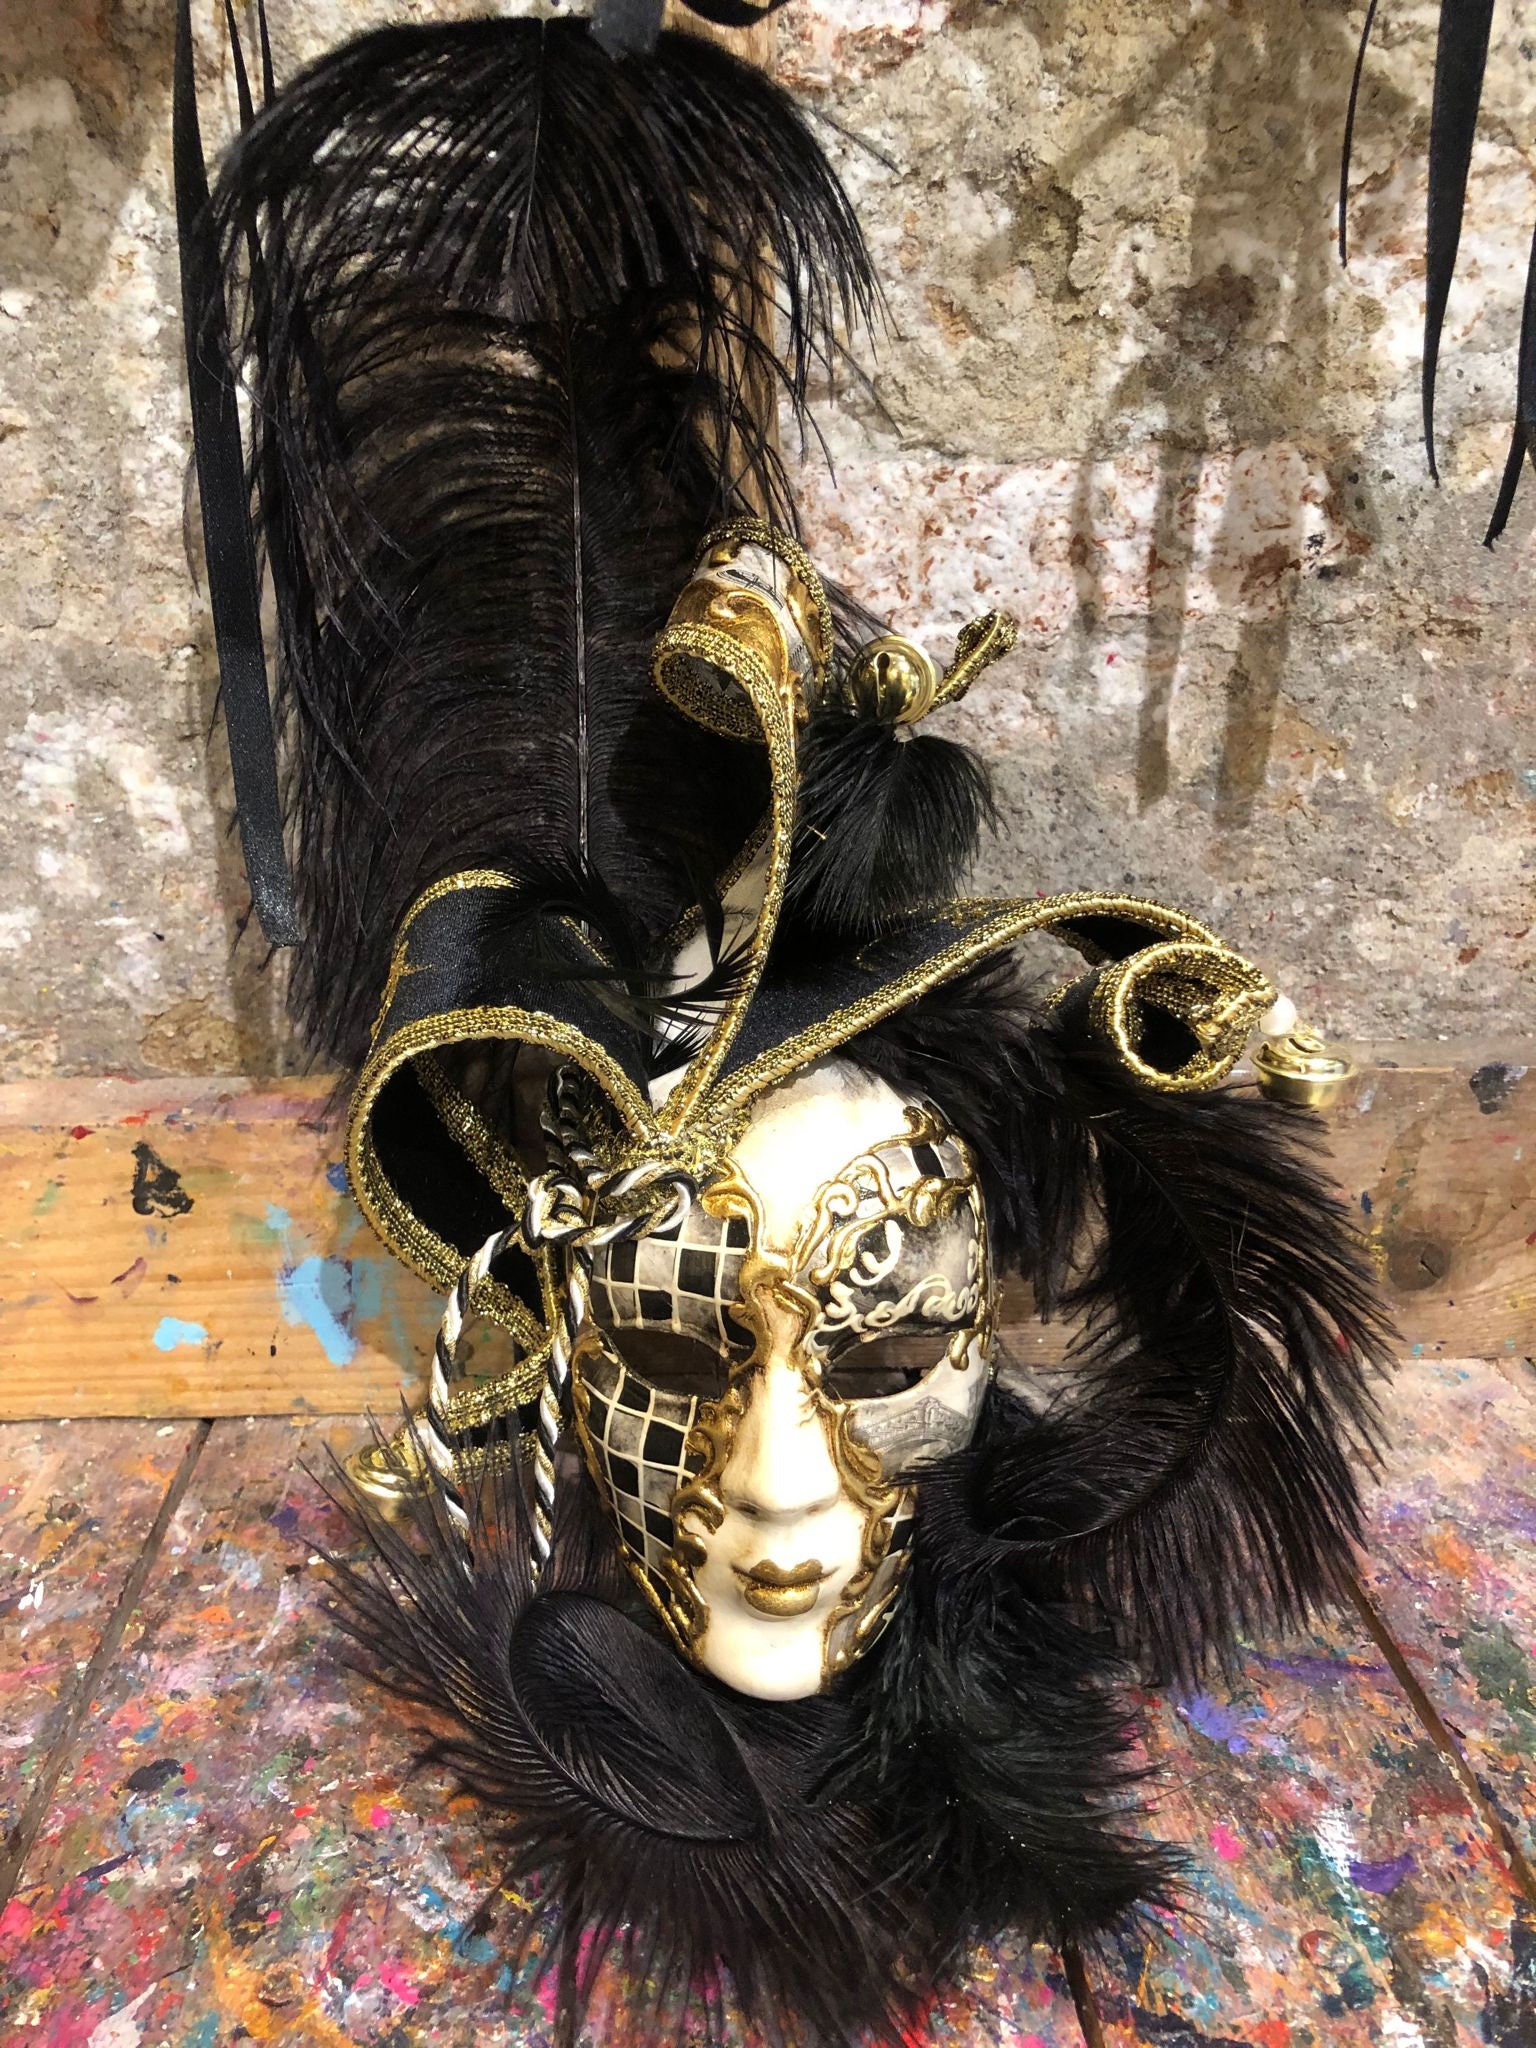 Carnival Face Mask With Feathers and Golden Decorations Mask for Ornamental  Use Hand Painted and Decorated in Venice -  Norway